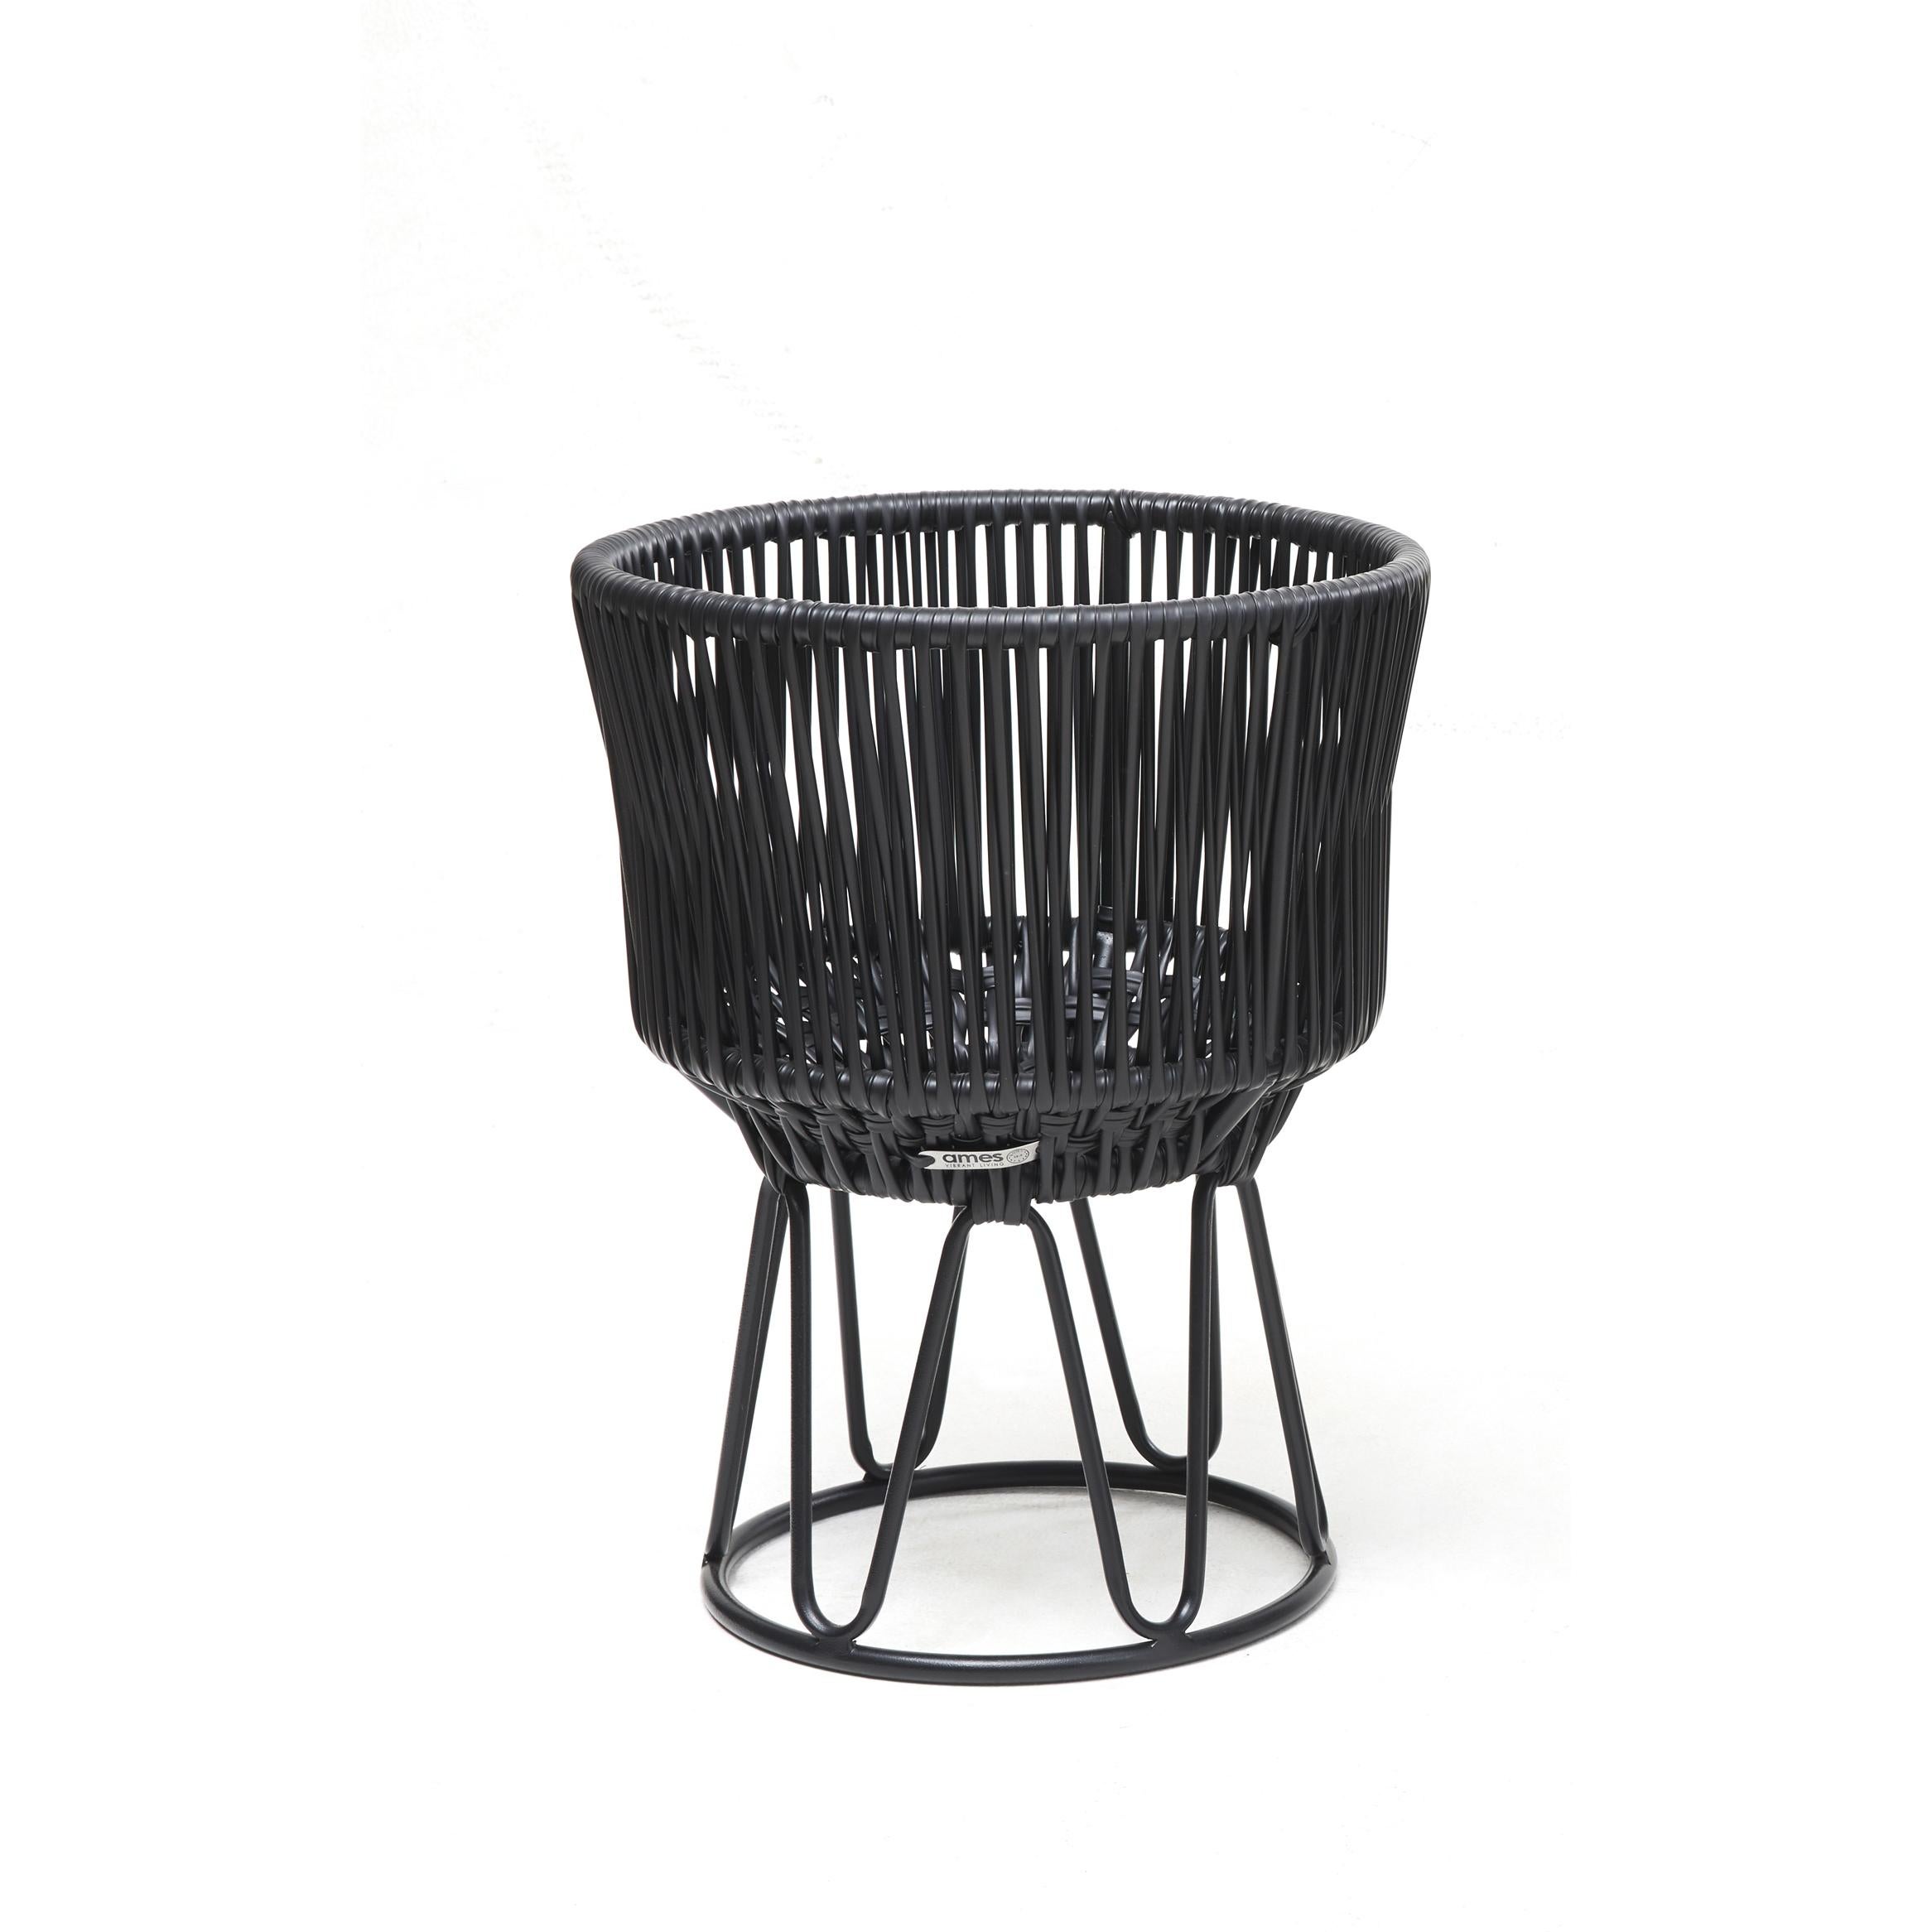 Black circo flower pot 1 by Sebastian Herkner
Materials: Galvanized and powder-coated tubular steel. PVC strings.
Technique: Made from recycled plastic. Weaved by local craftspeople in Colombia. 
Dimensions: 
Top Diameter 36 x H 48 cm 
Base